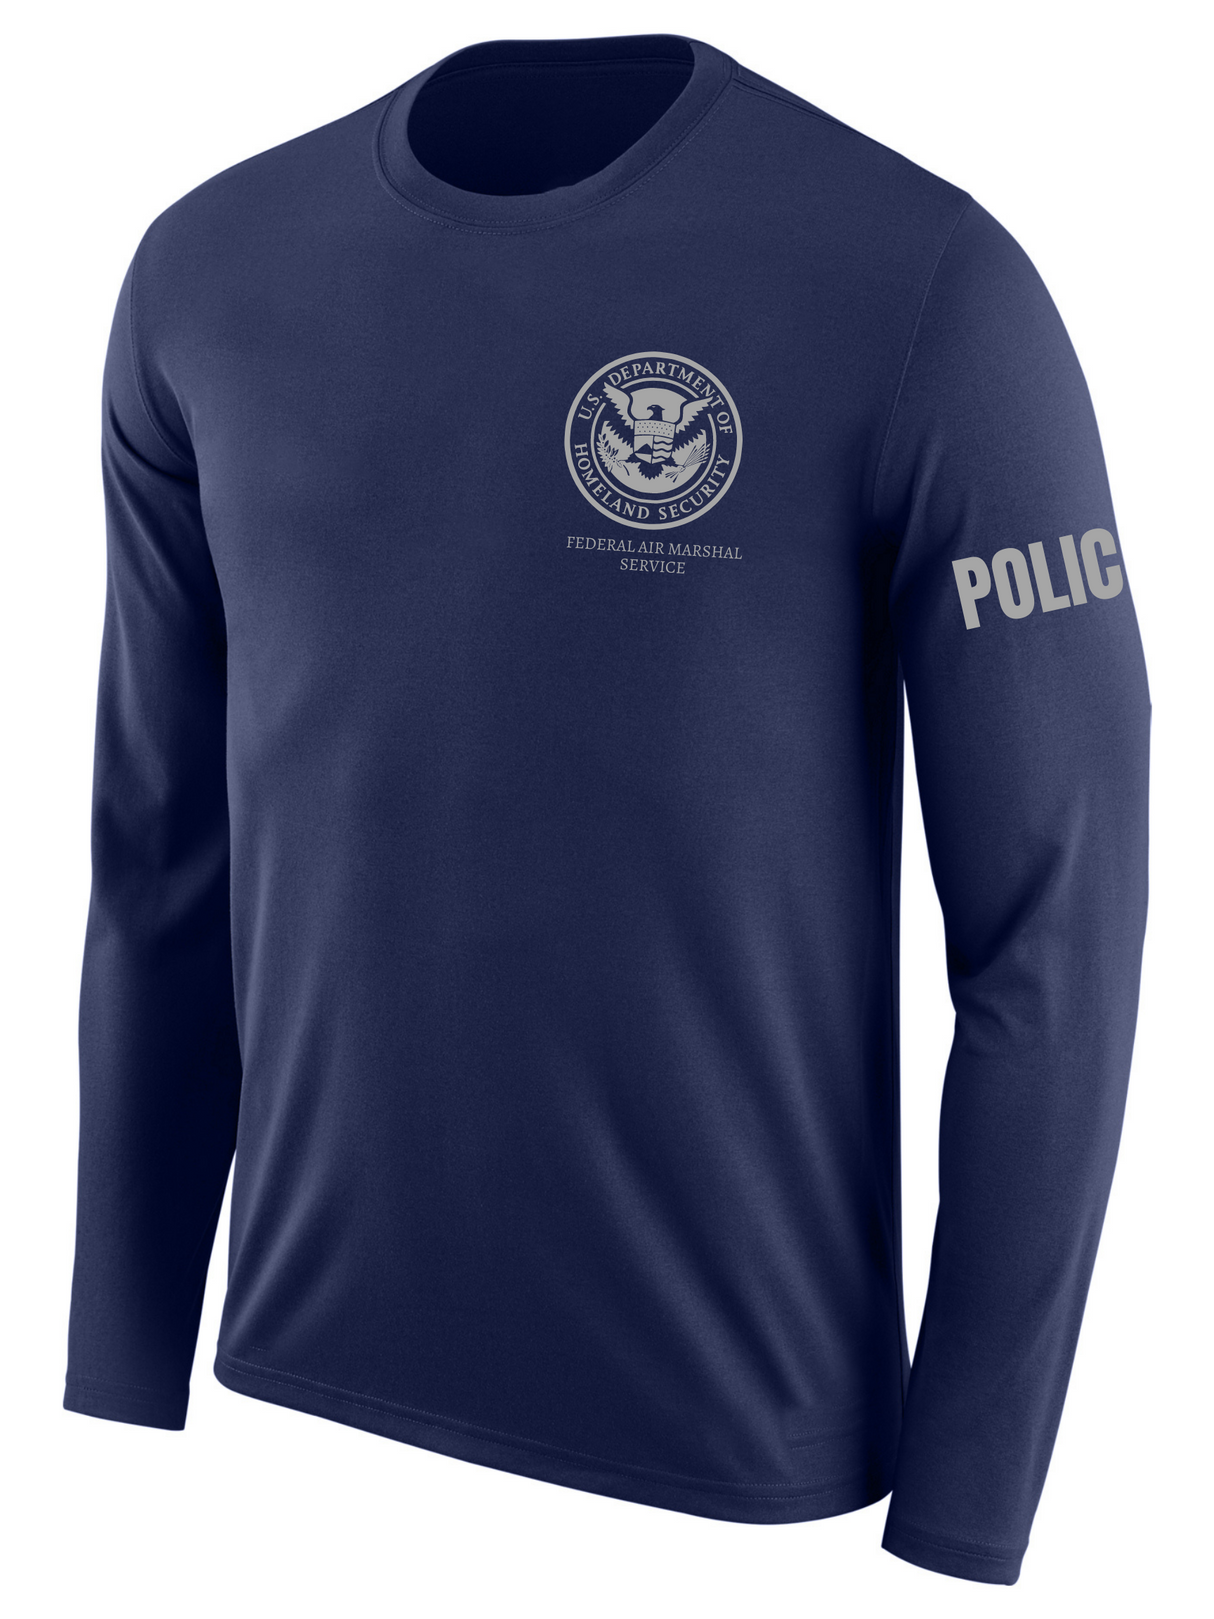 SUBDUED DHS FAMS Agency Identifier T Shirt - Long Sleeve - FEDS Apparel